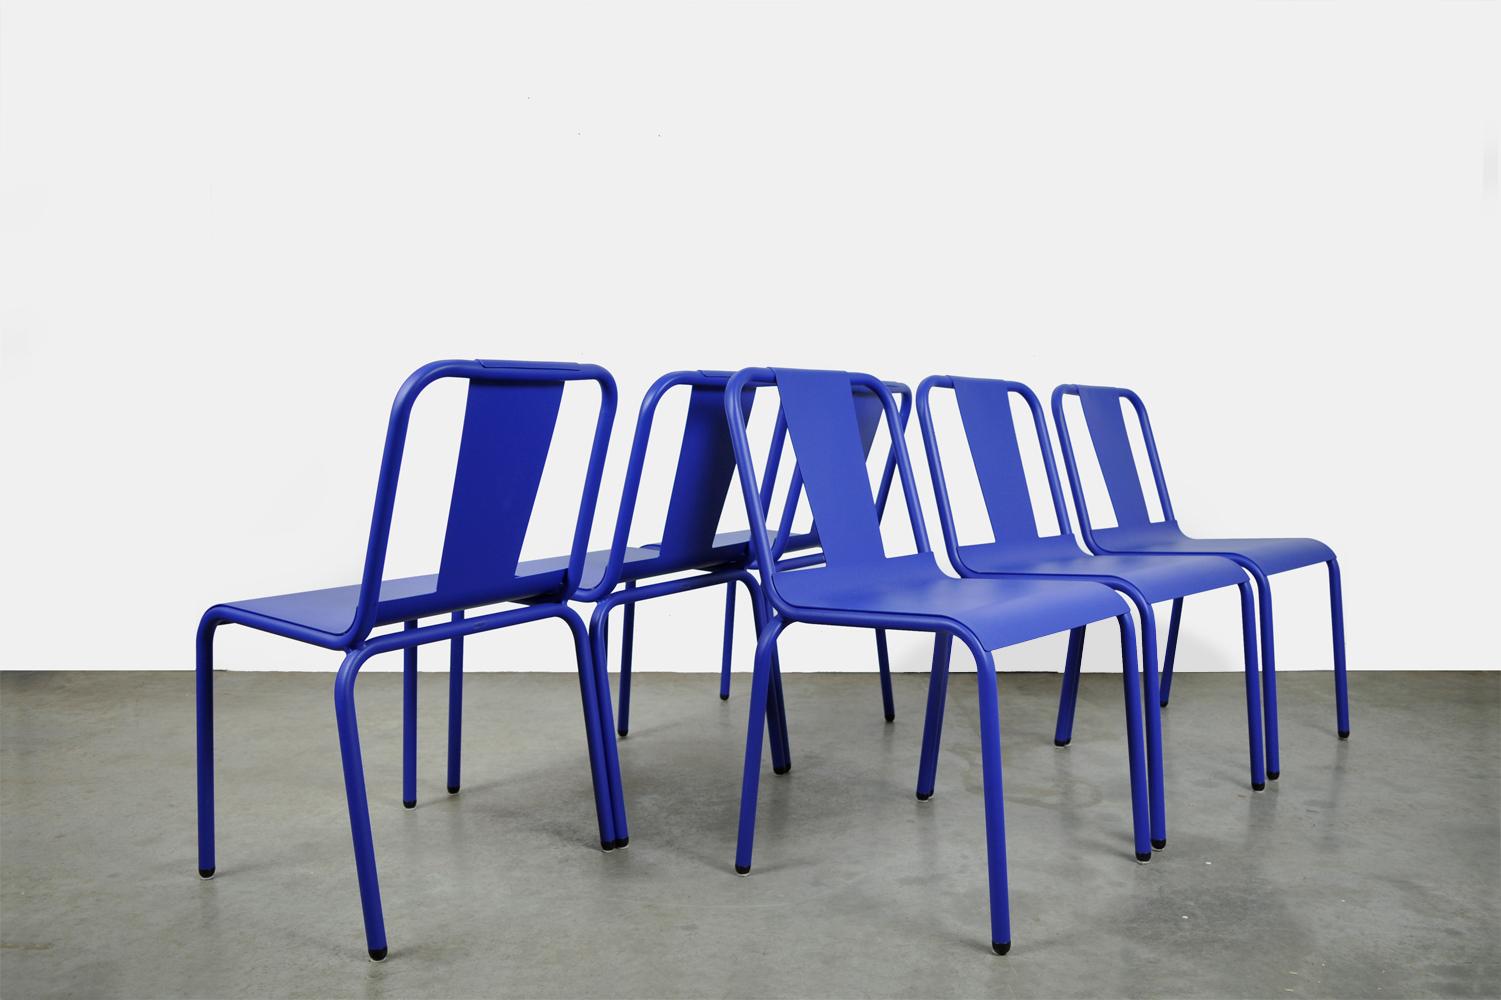 Spanish Set of 6 Design Chairs by Isi Design Group, Produced by Isimar, 2000 Spain